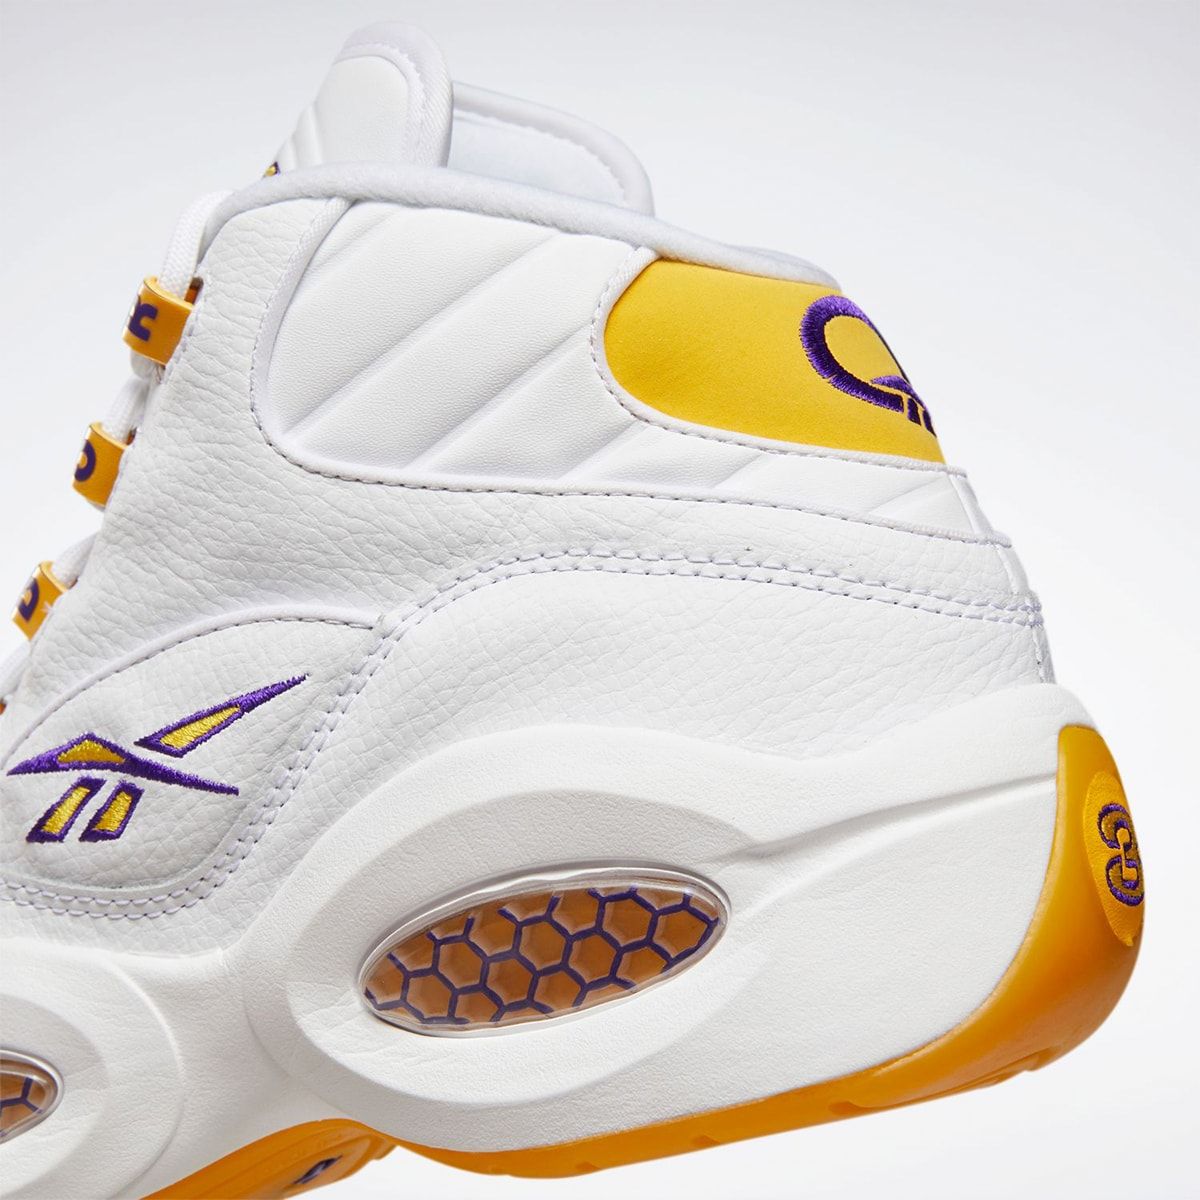 How To Style Reebok Question Mid “Yellow Toe” (Kobe Bryant PE)